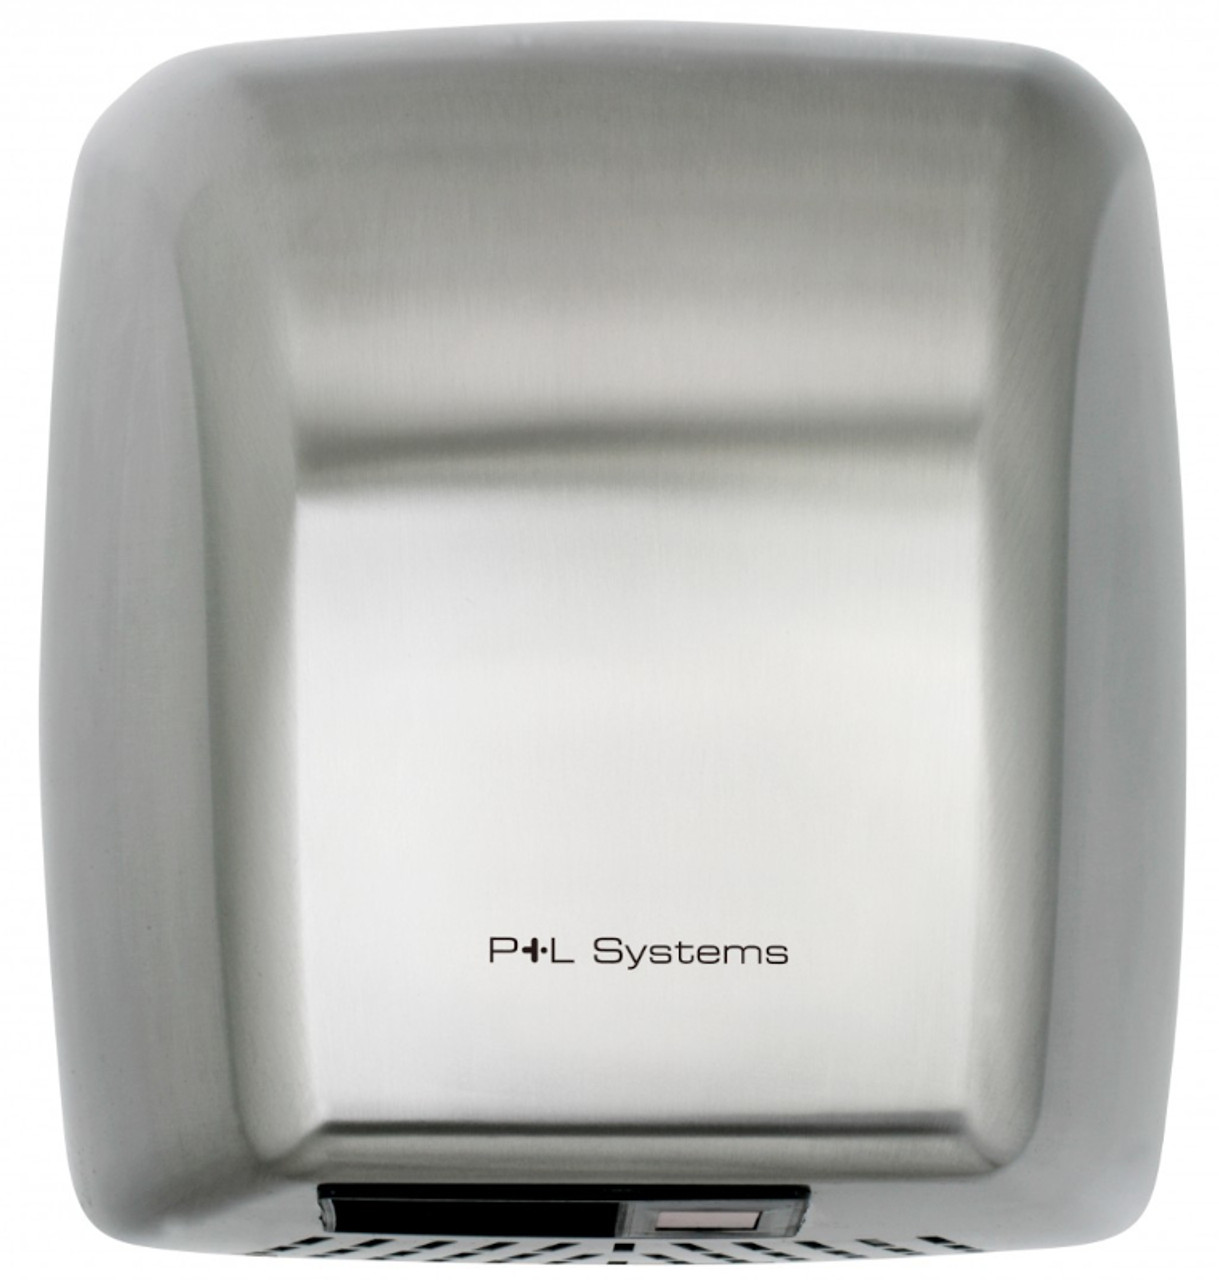 DV2100S - P+L Automatic Hand Dryer - 2100-Watt - Brushed Stainless Steel